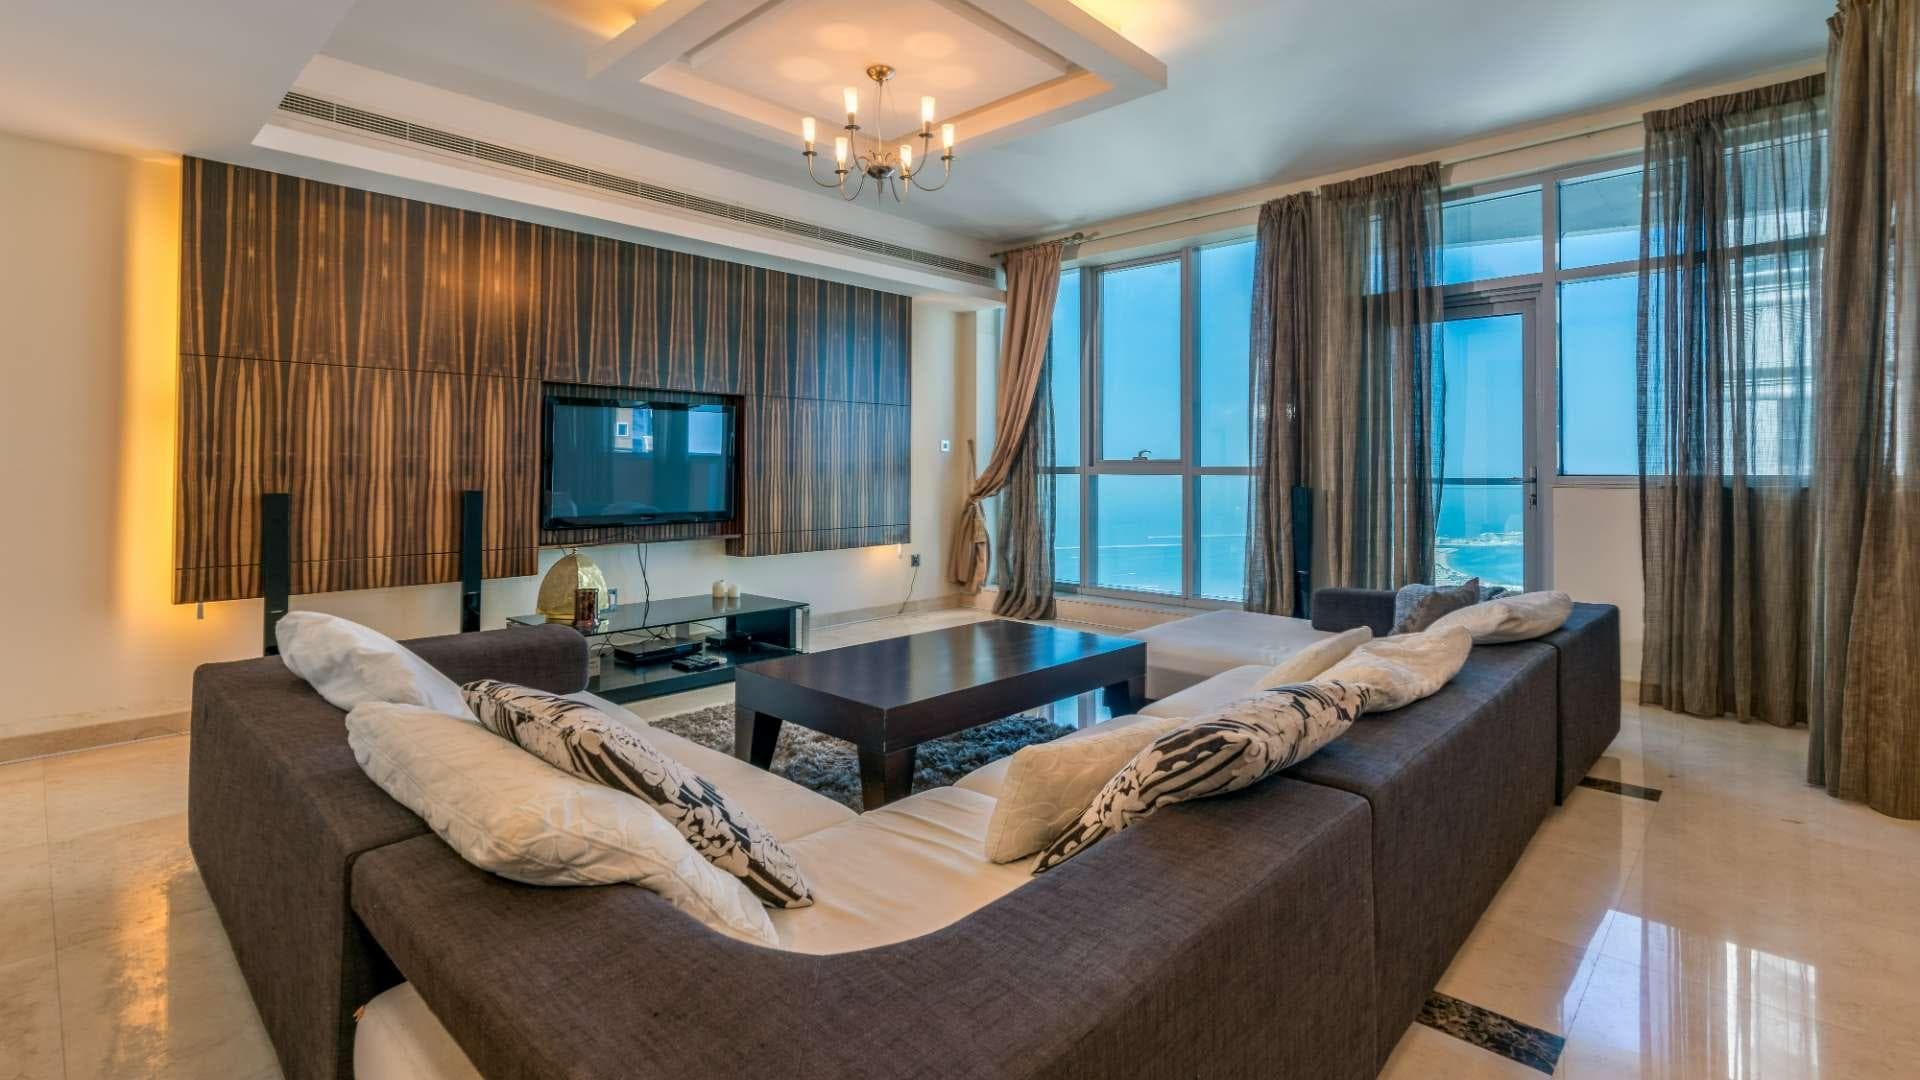 3 Bedroom Penthouse For Sale Torch Tower Lp37252 2c533ad092e00e00.jpg